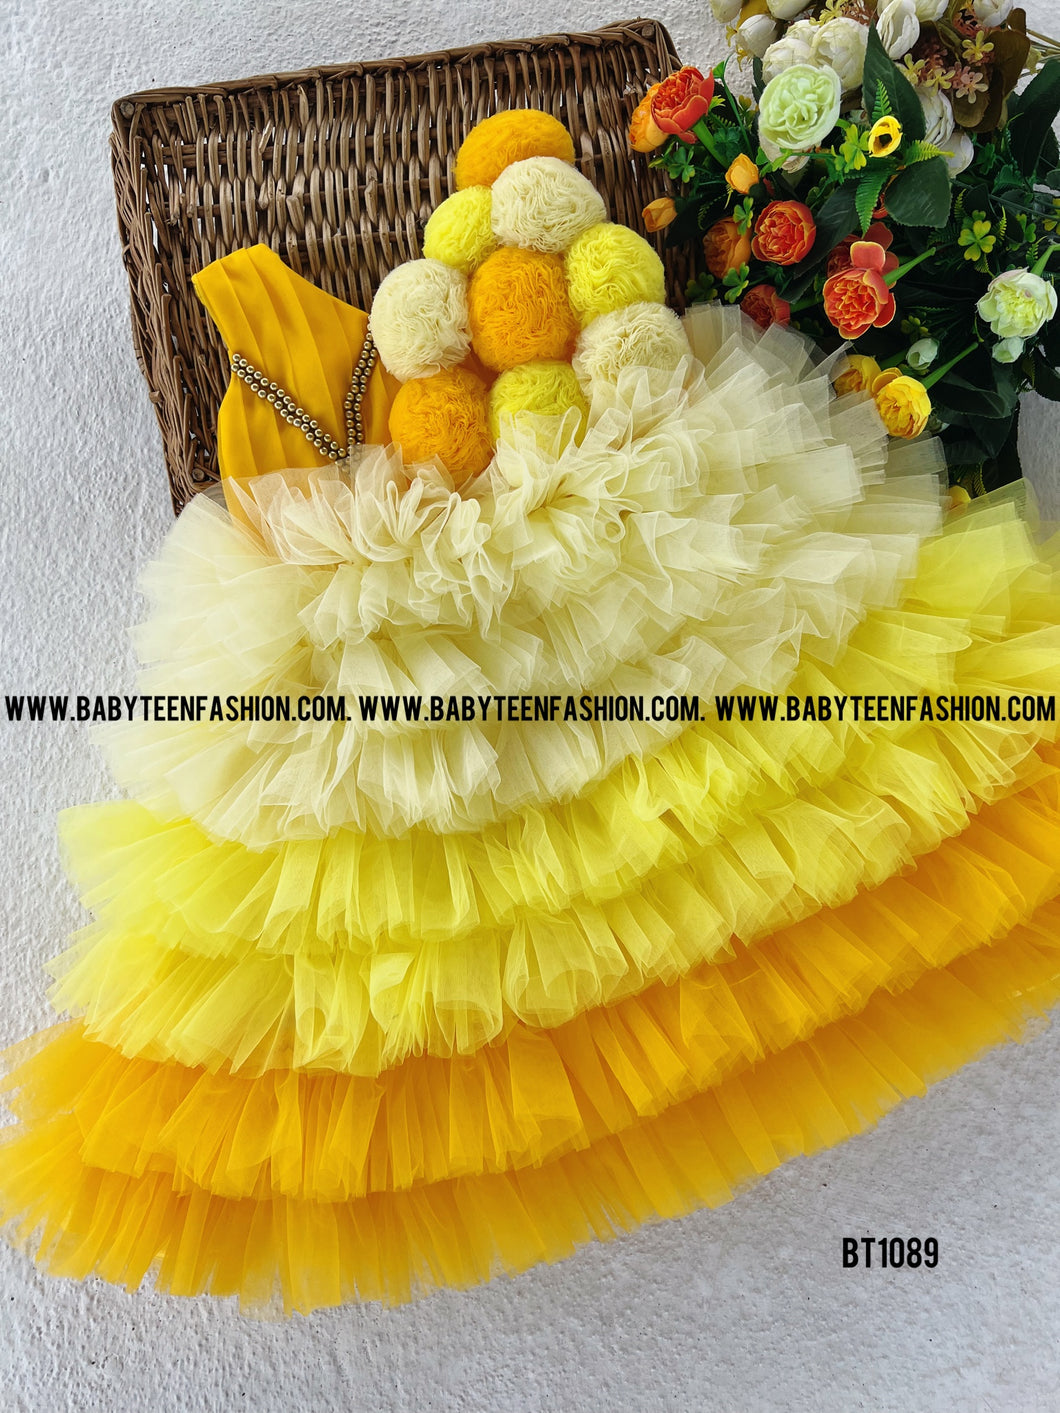 BT1087 Birthday Frock with Hand Made Flowers